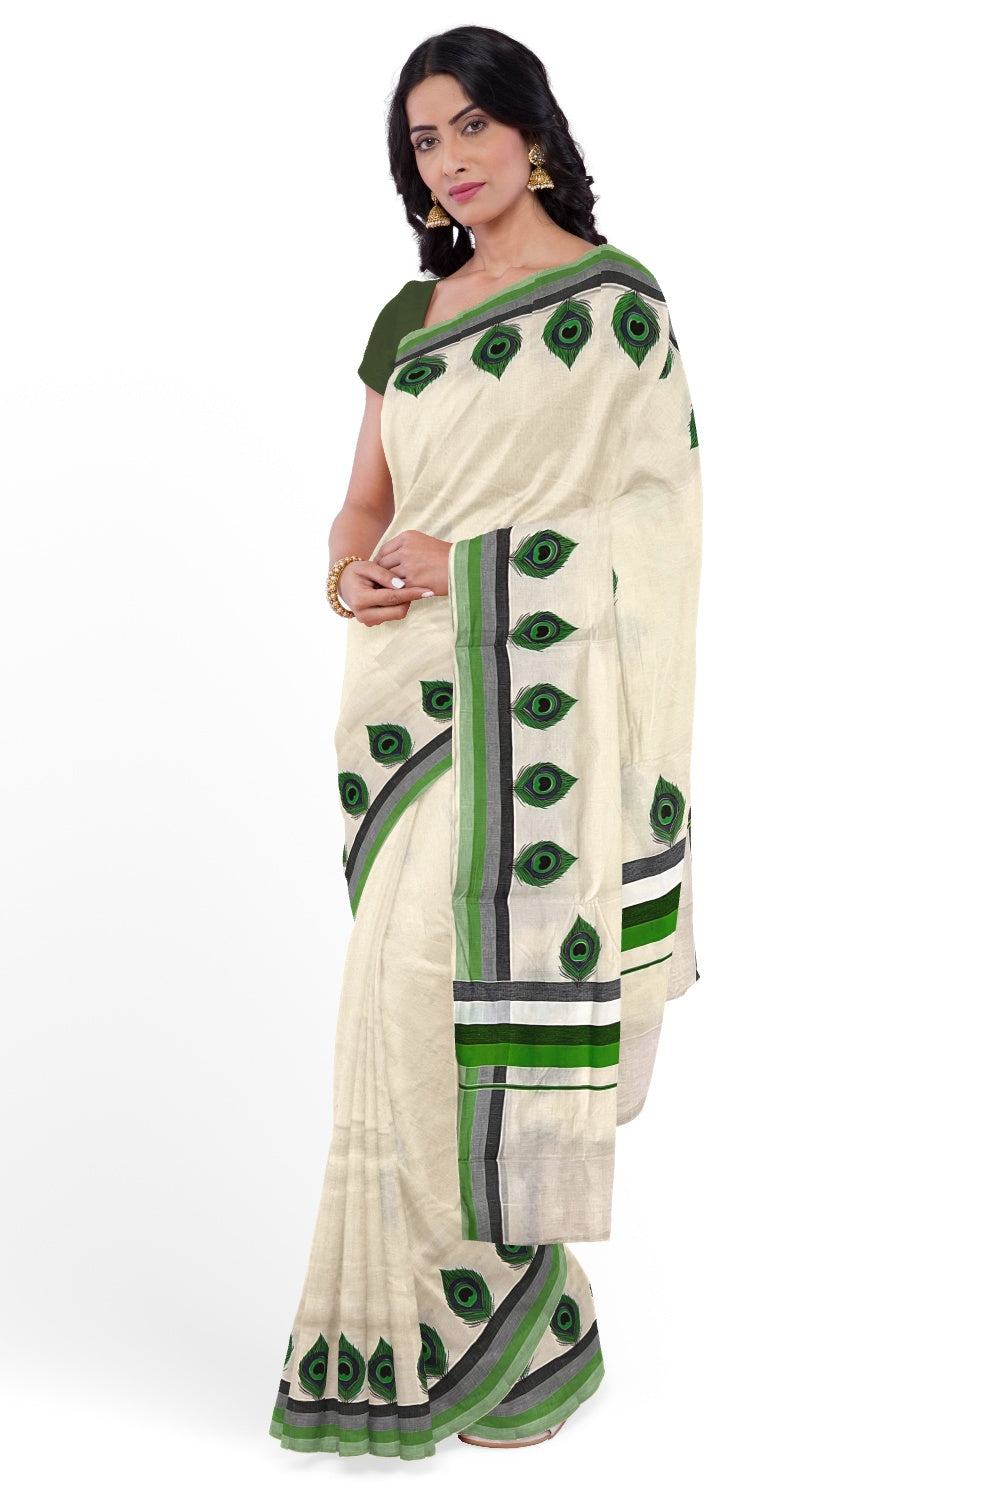 Kerala Cotton Saree with Green Peacock Feather Mural Printed and Multi Colour Border